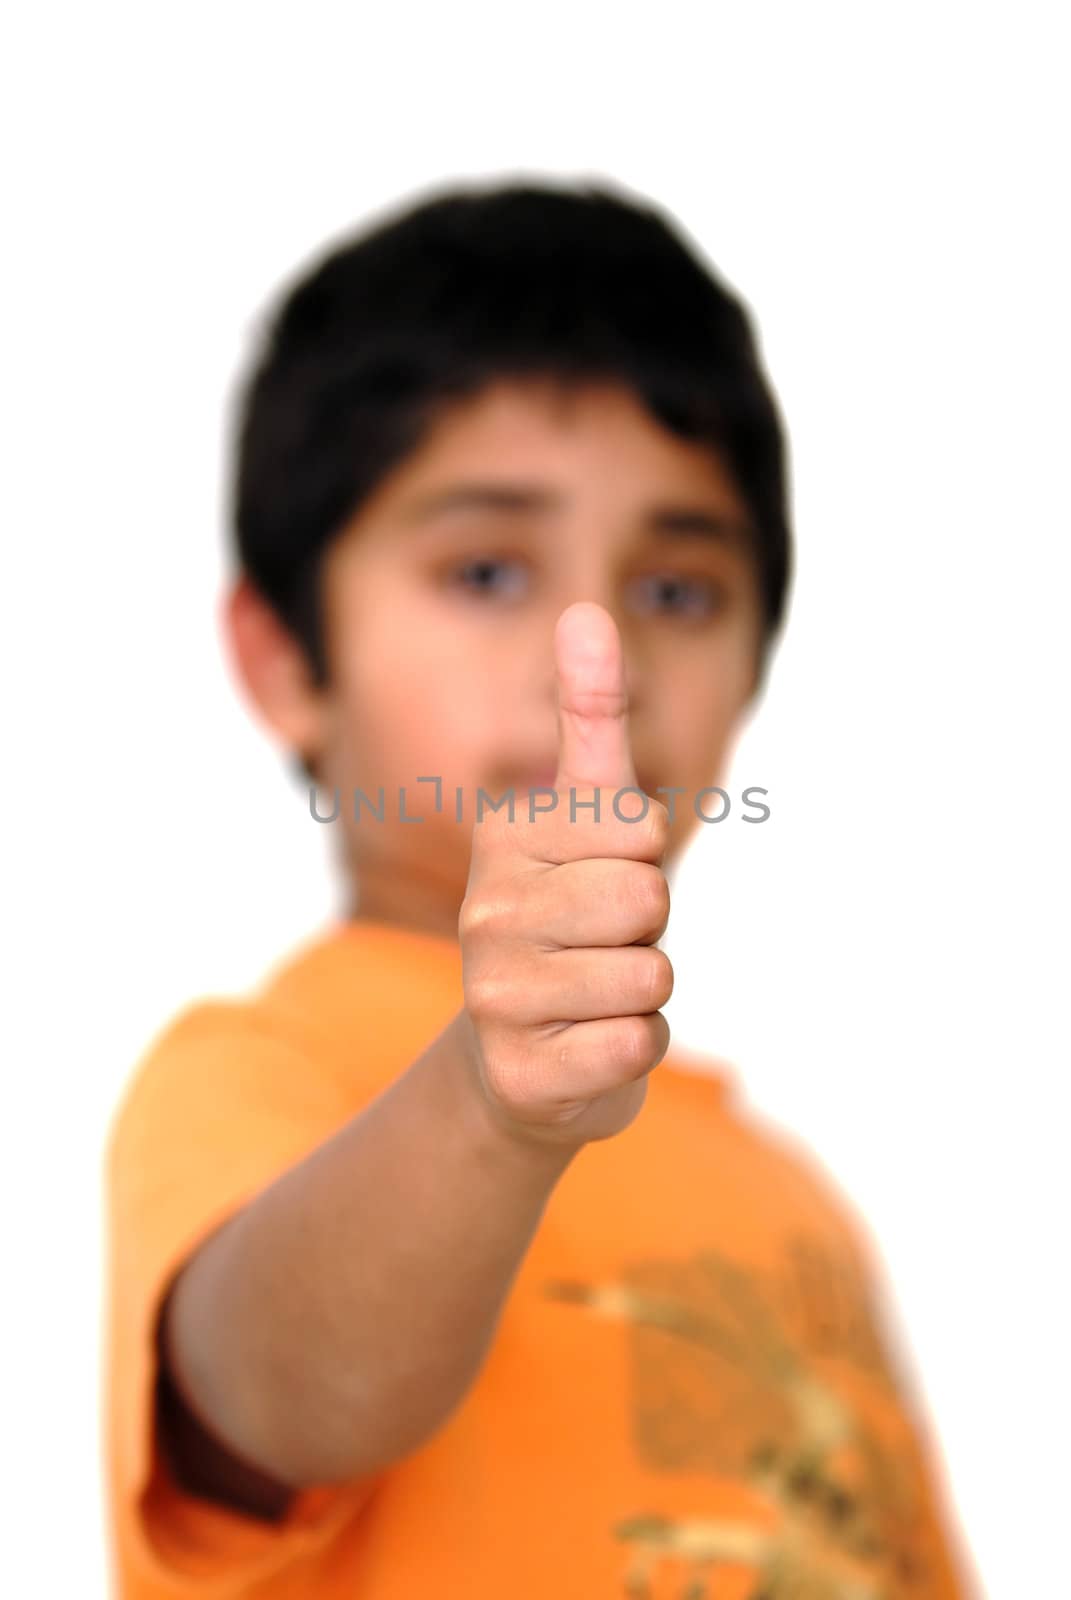 An young boy showing thumbs up indicating success